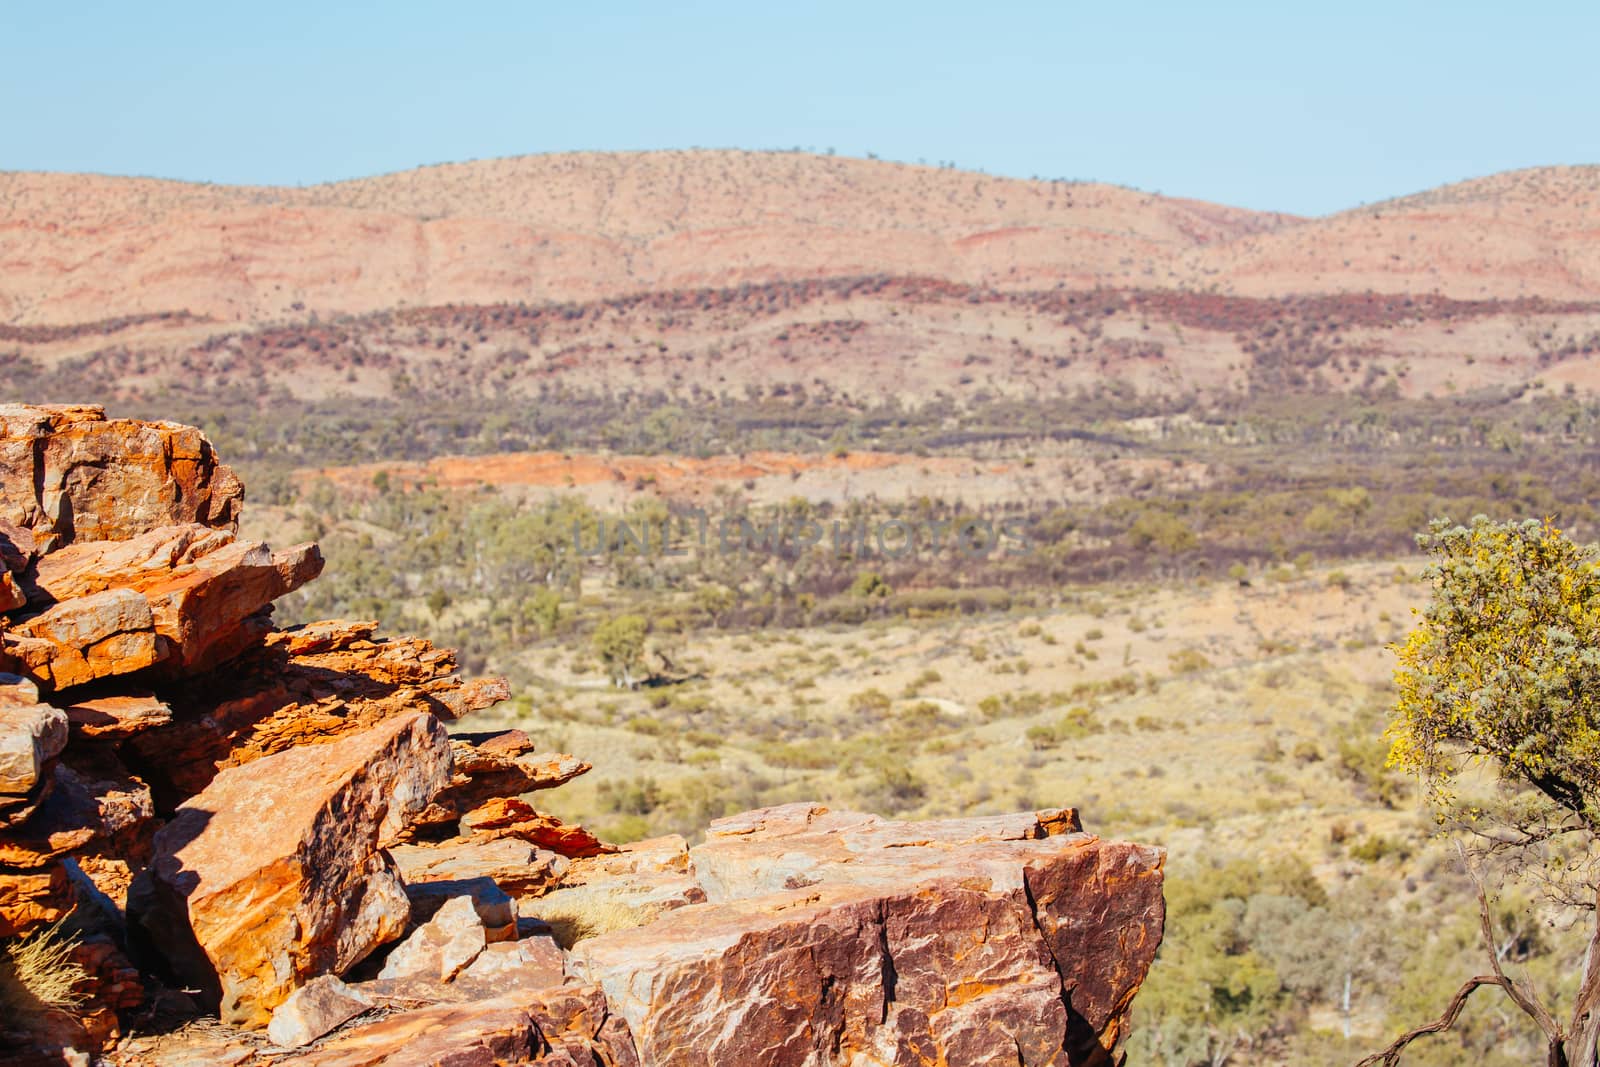 The view from the Serpentine Gorge Lookout on a clear winter's day near Alice Springs, Northern Territory, Australia